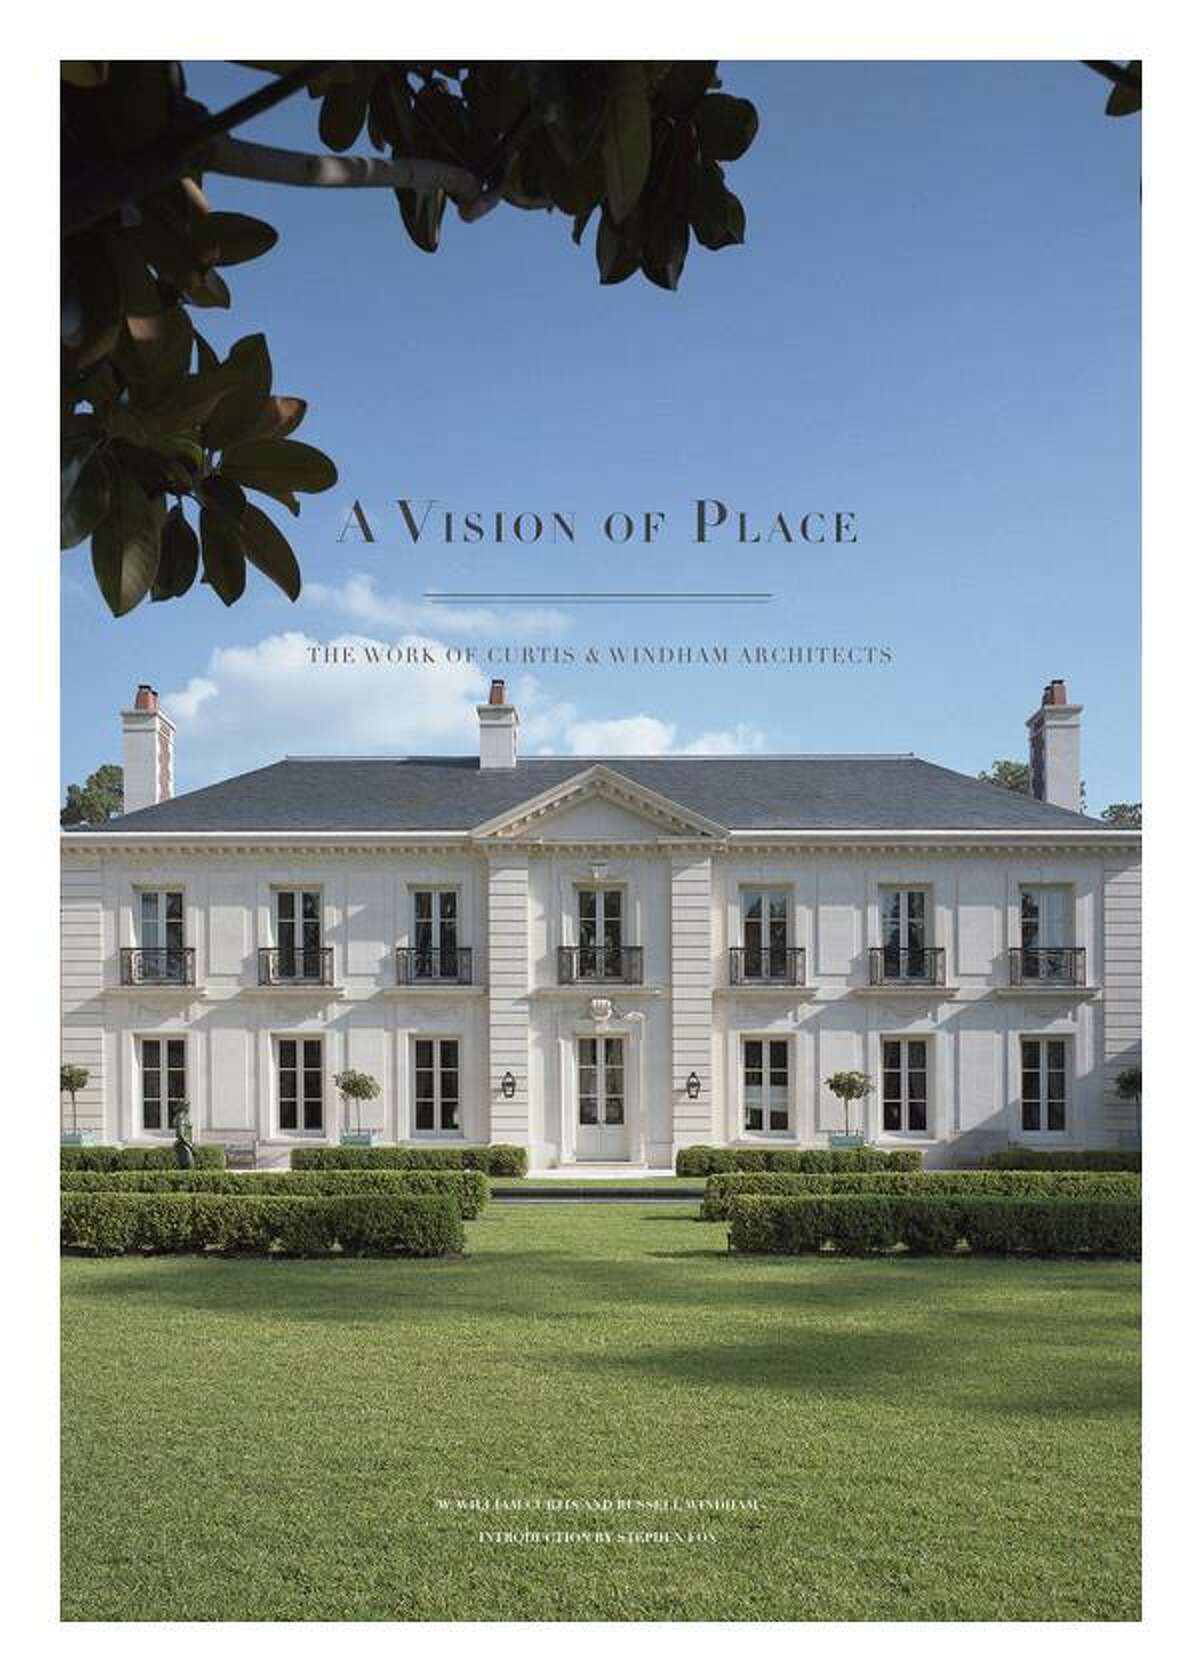 The architects' book is about their classic style. Many of the homes and projects featured in the book are in Houston.